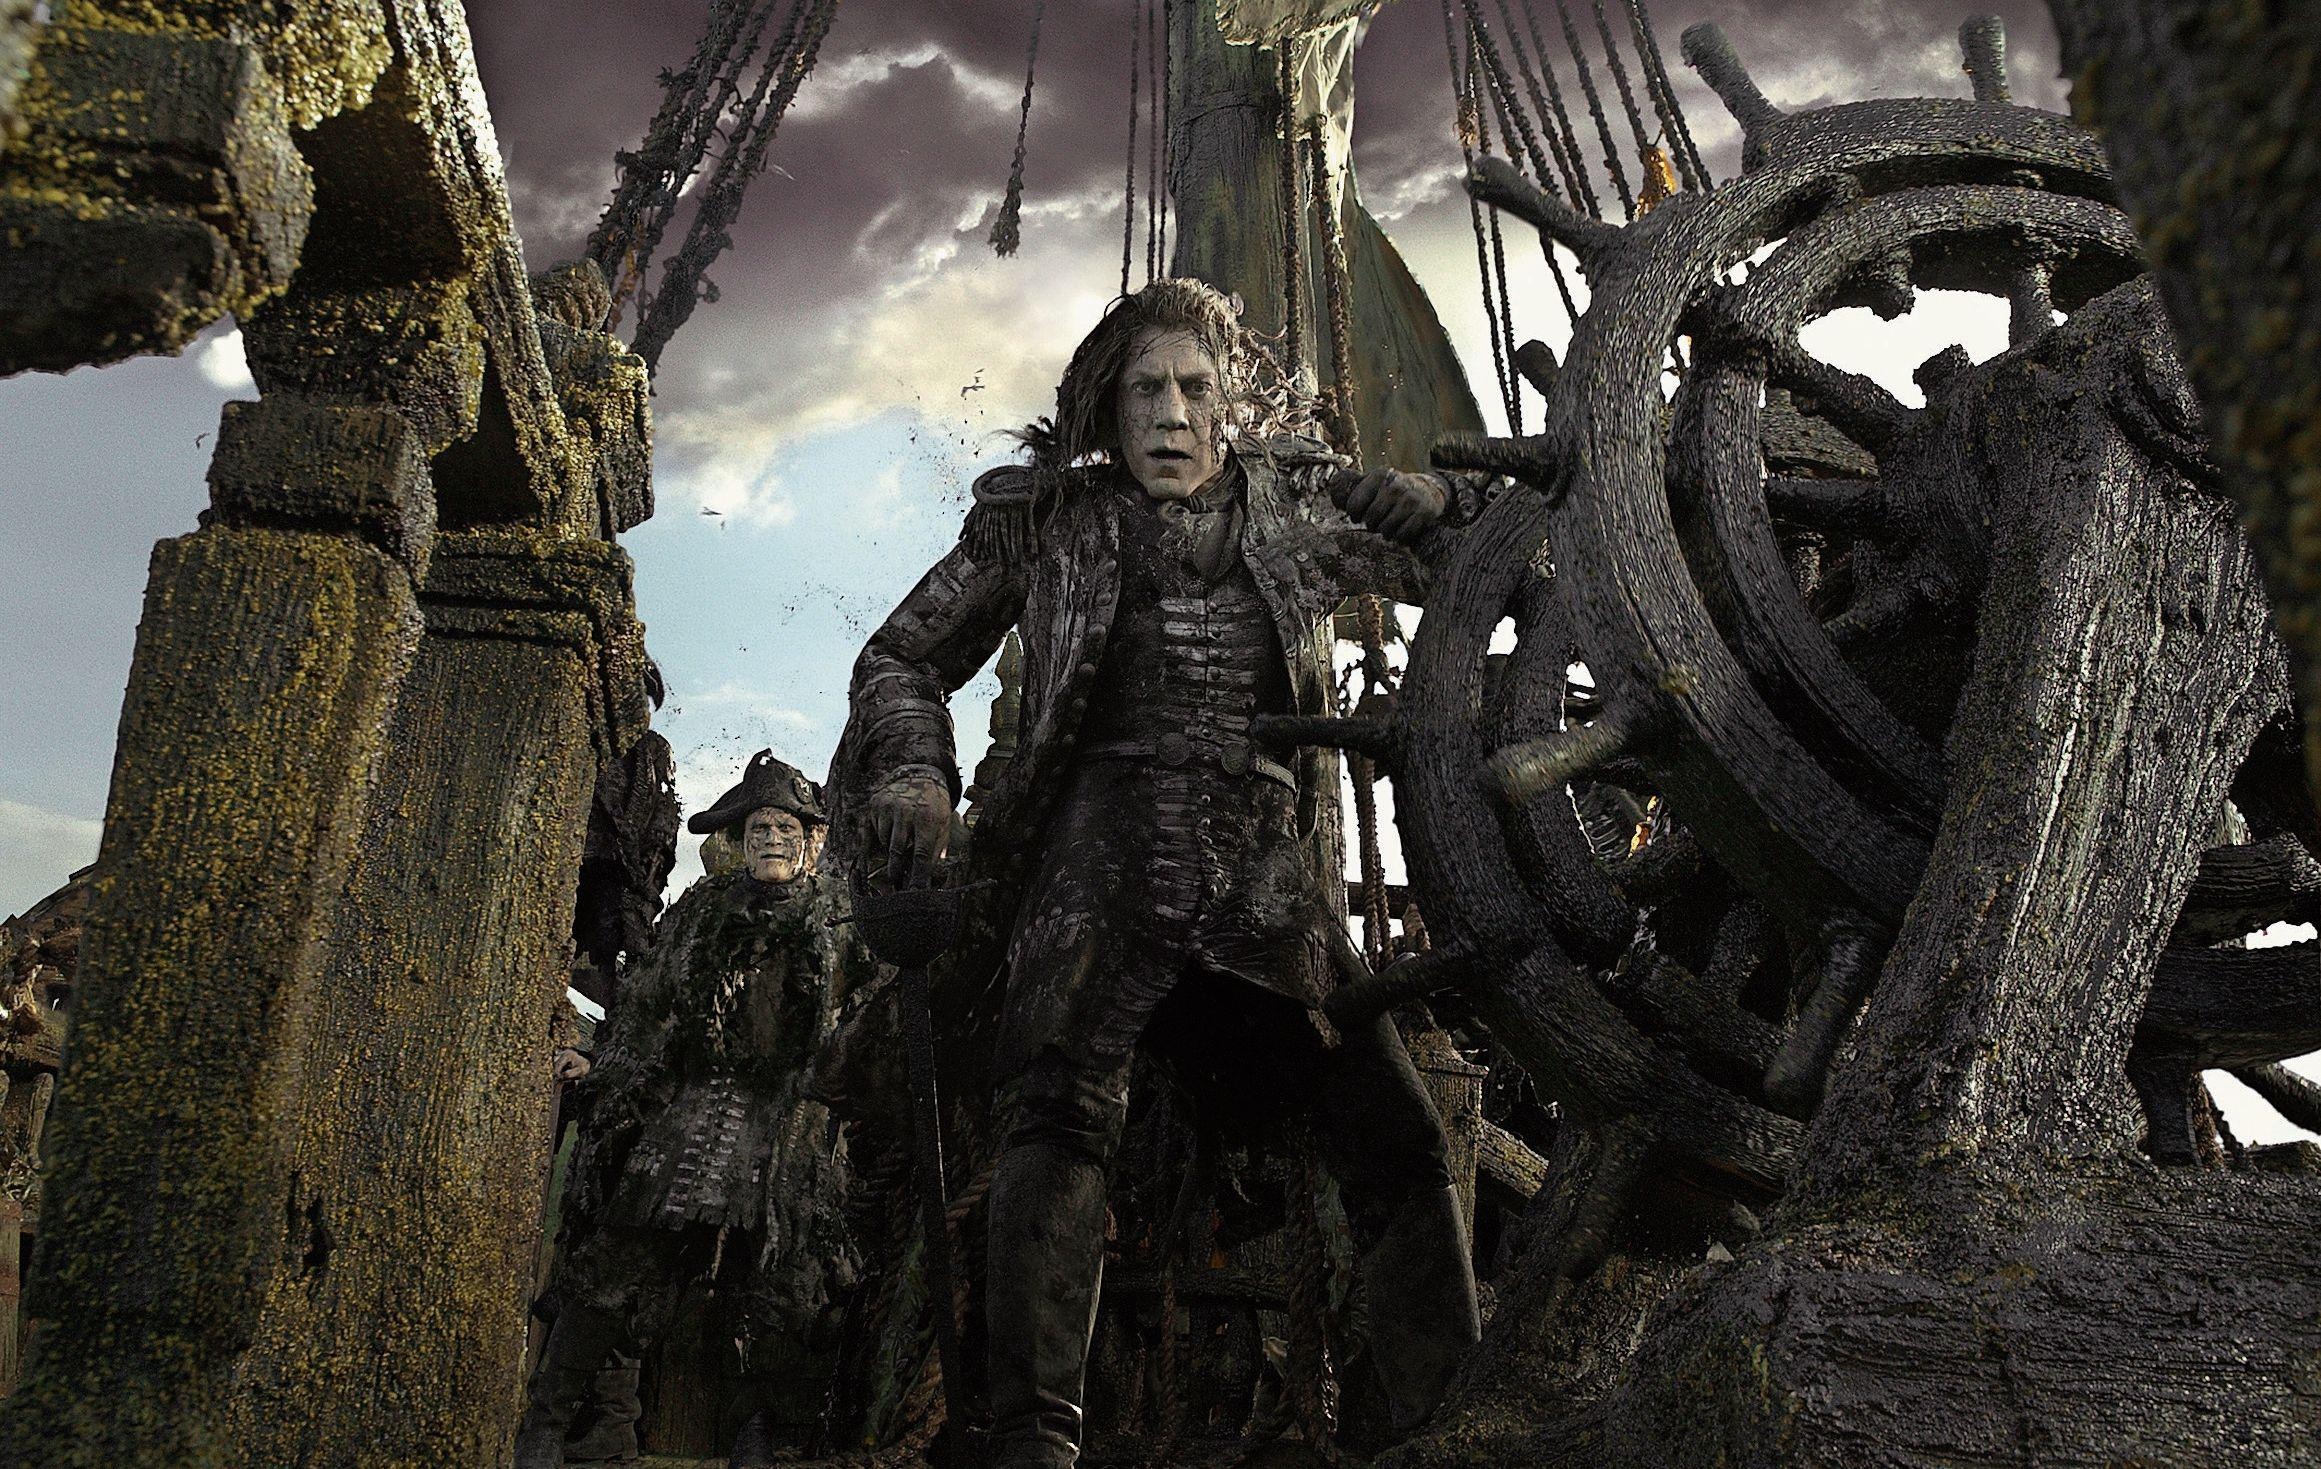 Javier Bardem (Captain Salazar): Jack Sparrow's enemy, The former captain of the powerful pirate-hunting galleon. 2330x1470 HD Wallpaper.